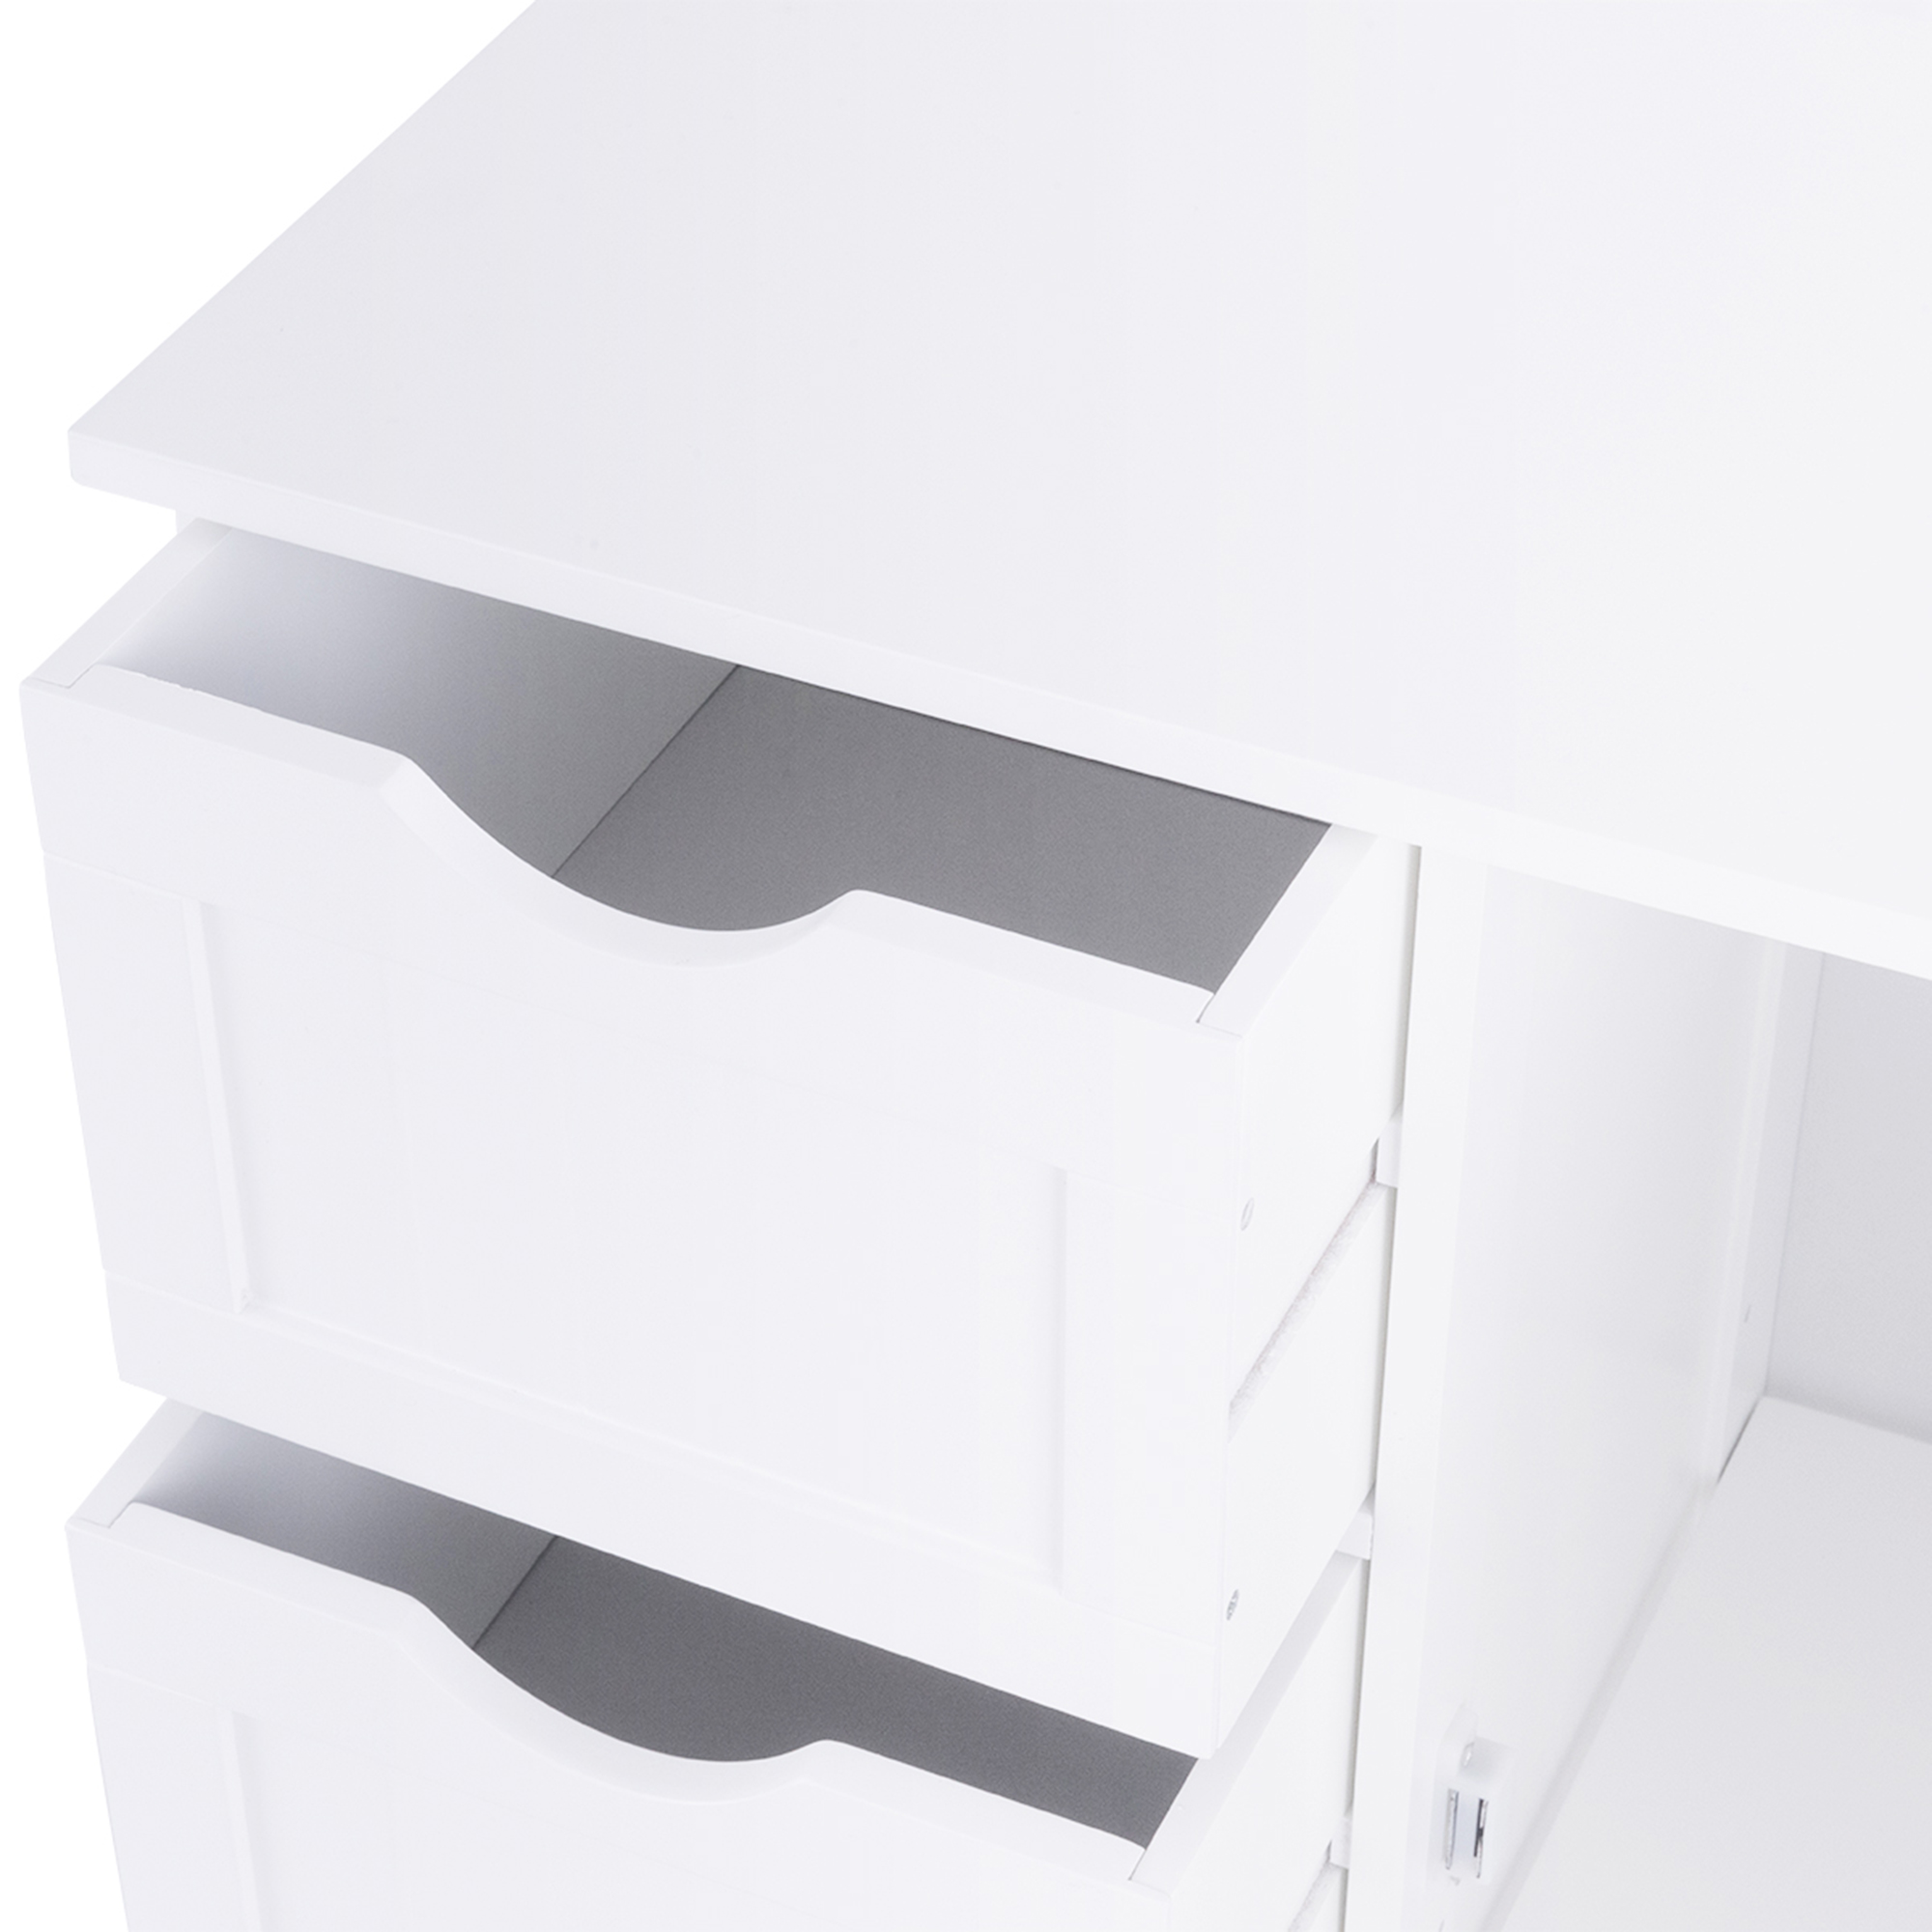 Costway Wooden 4 Drawer Bathroom Cabinet Storage Cupboard 2 Shelves Free Standing White - image 5 of 10